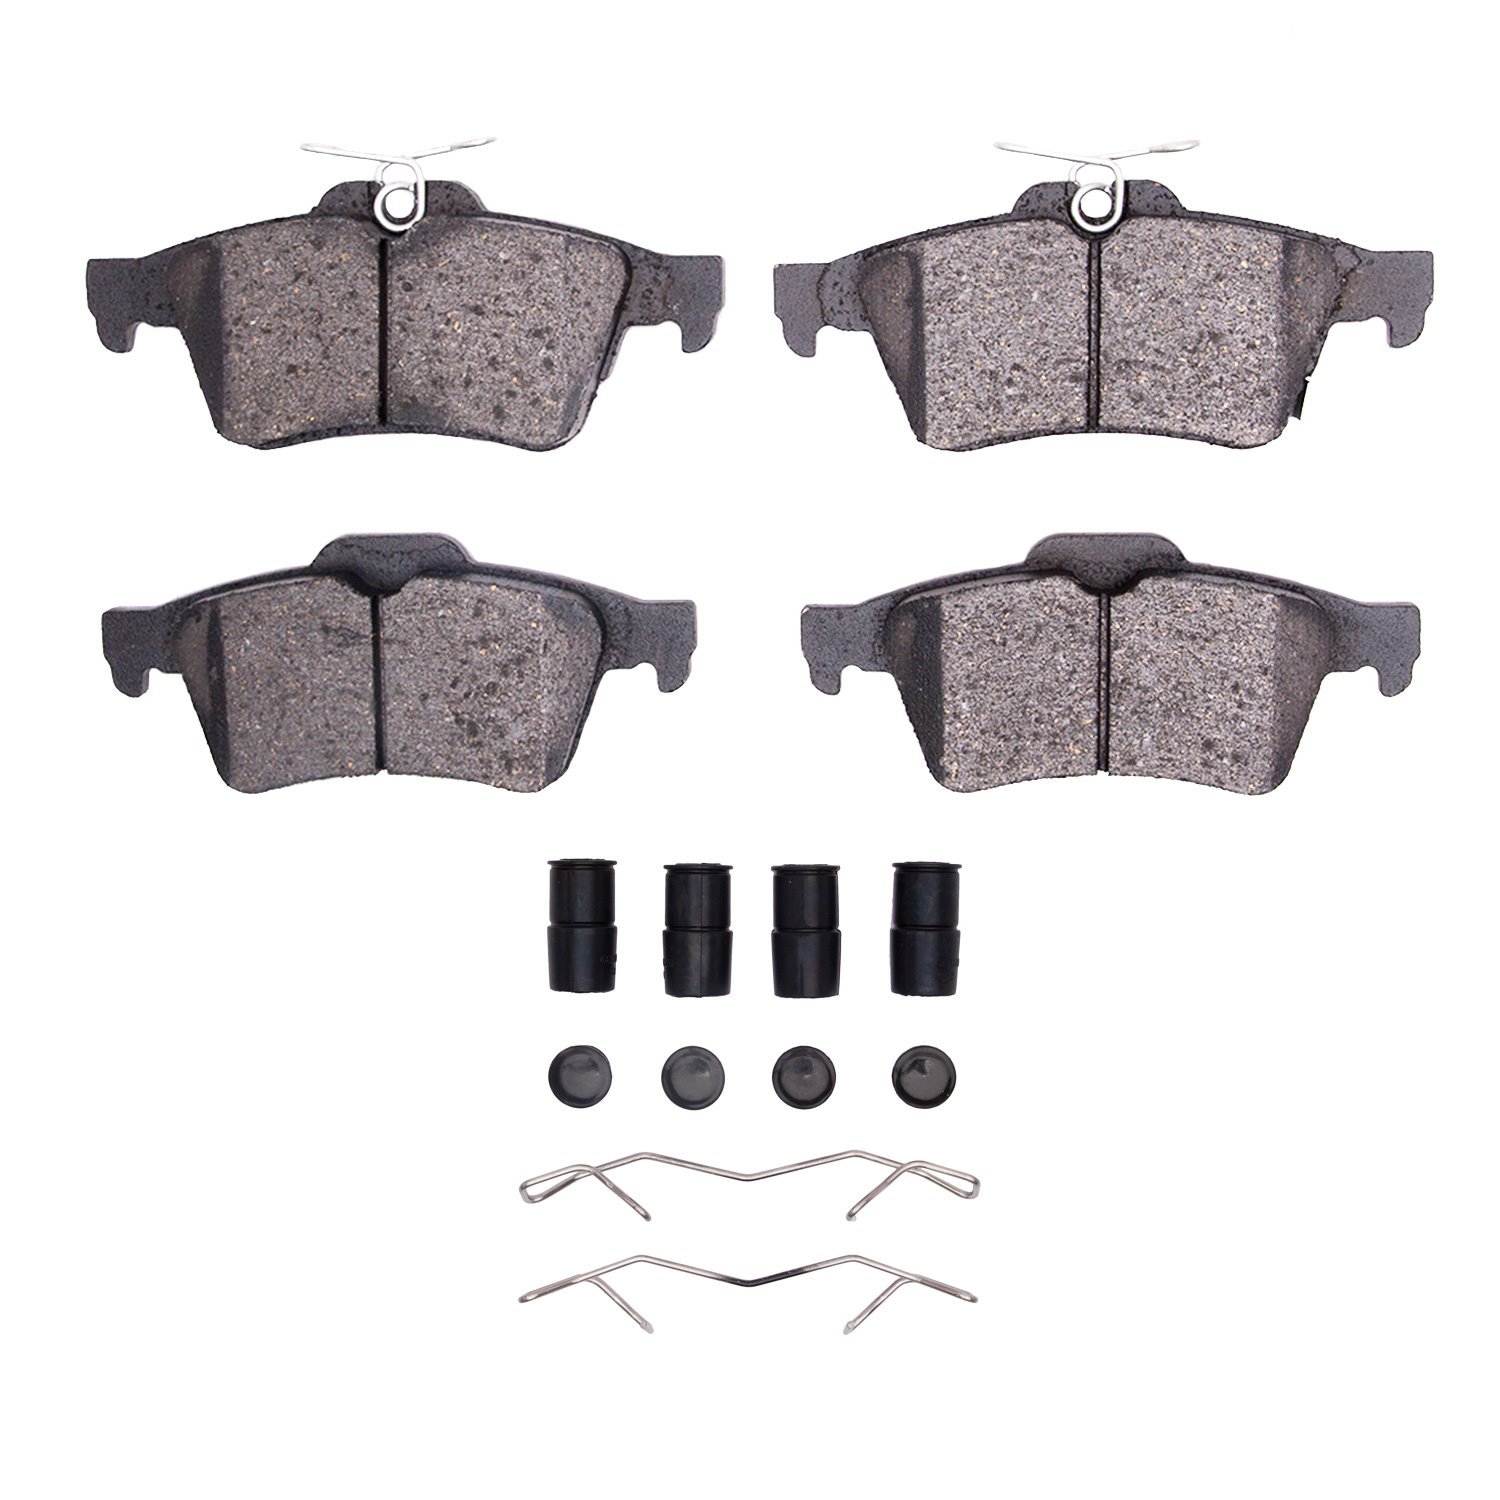 1310-1564-11 3000-Series Ceramic Brake Pads & Hardware Kit, Fits Select Ford/Lincoln/Mercury/Mazda, Position: Rear